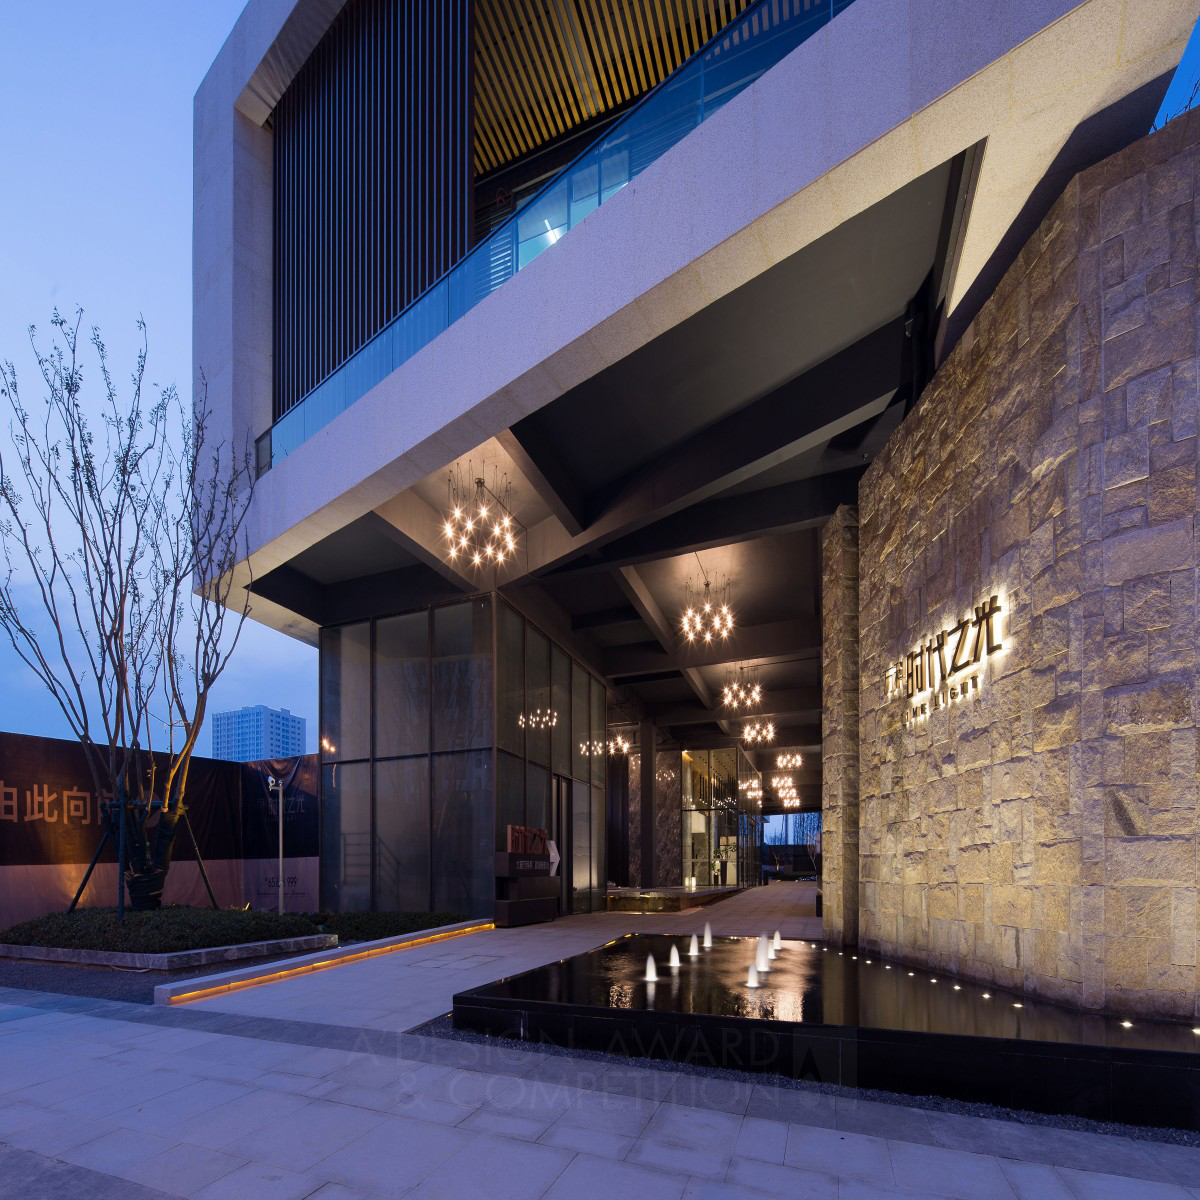 Hefei Vanke Sales Center It is a sales center by Raynon Chiu